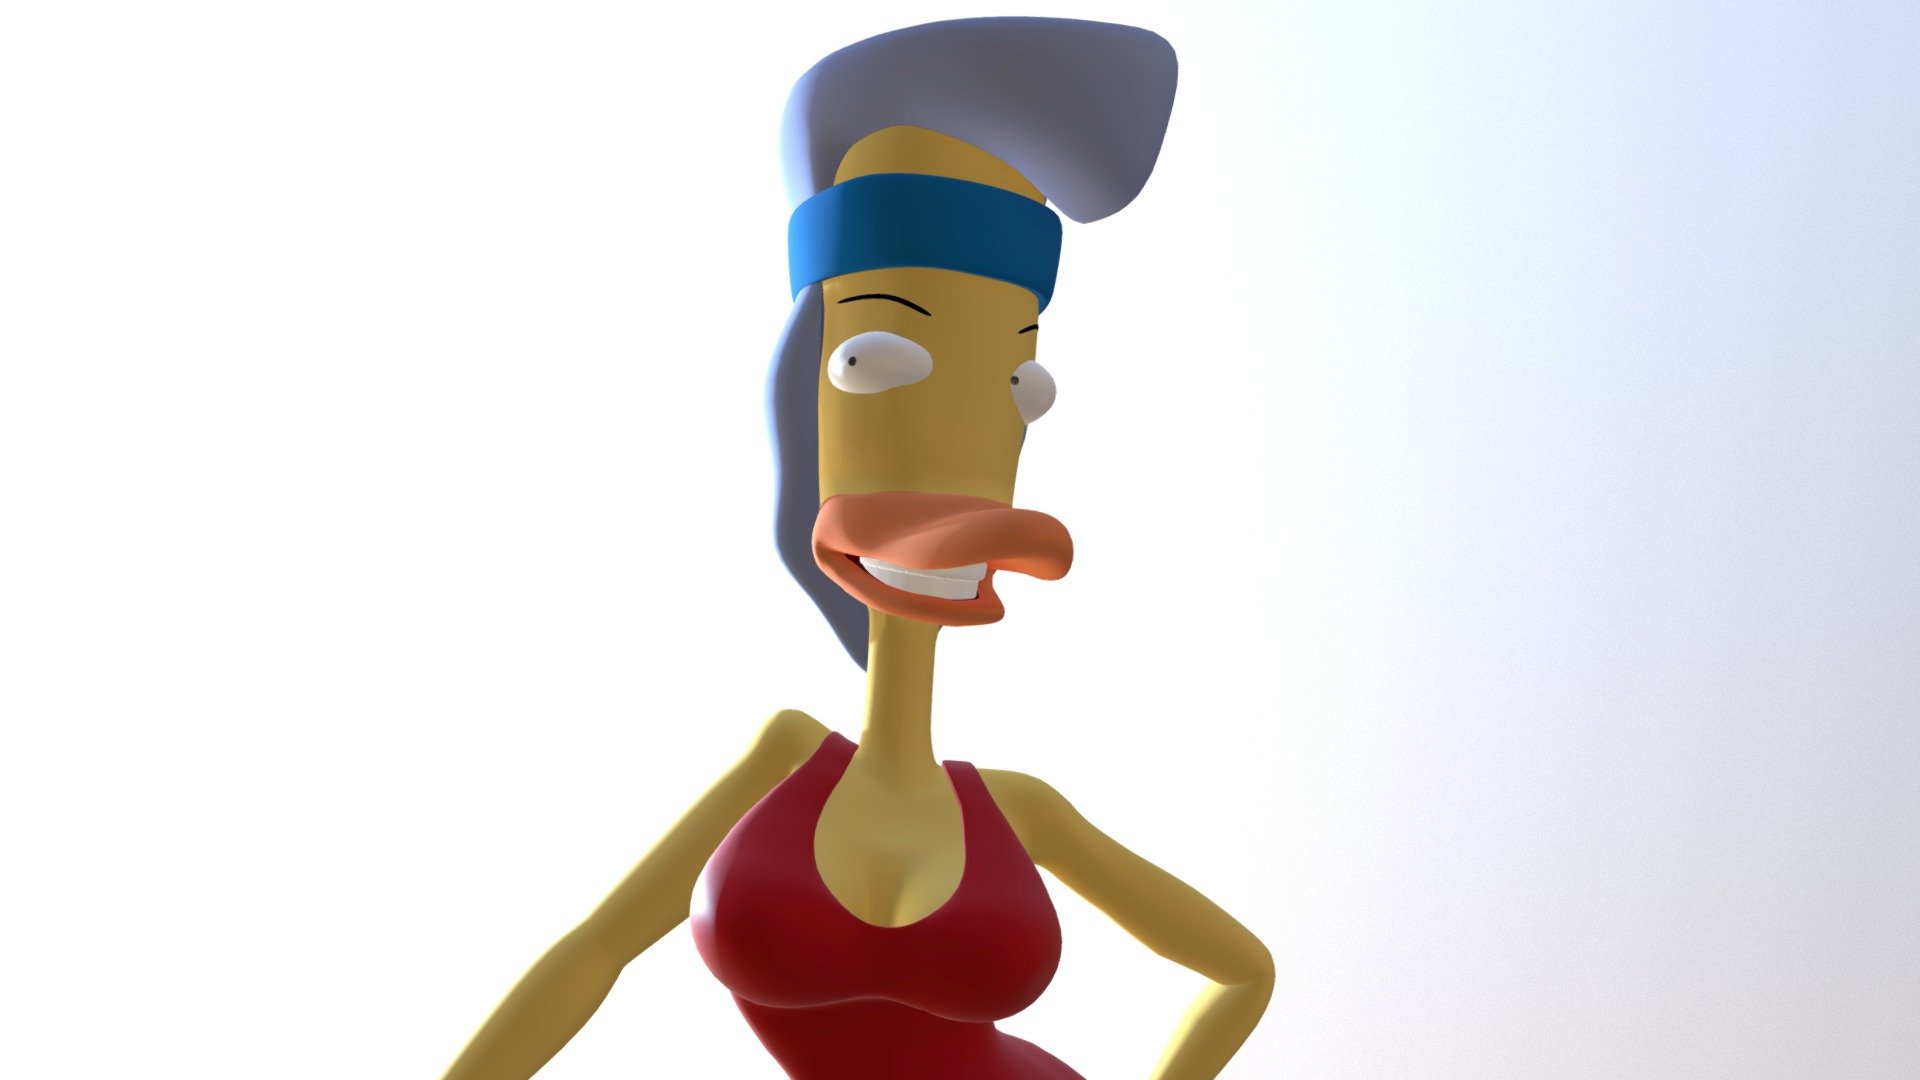 This is Bernice Hufnagel from Duckman! - Bernice Hufnagel - 3D model by Placidone 3d model